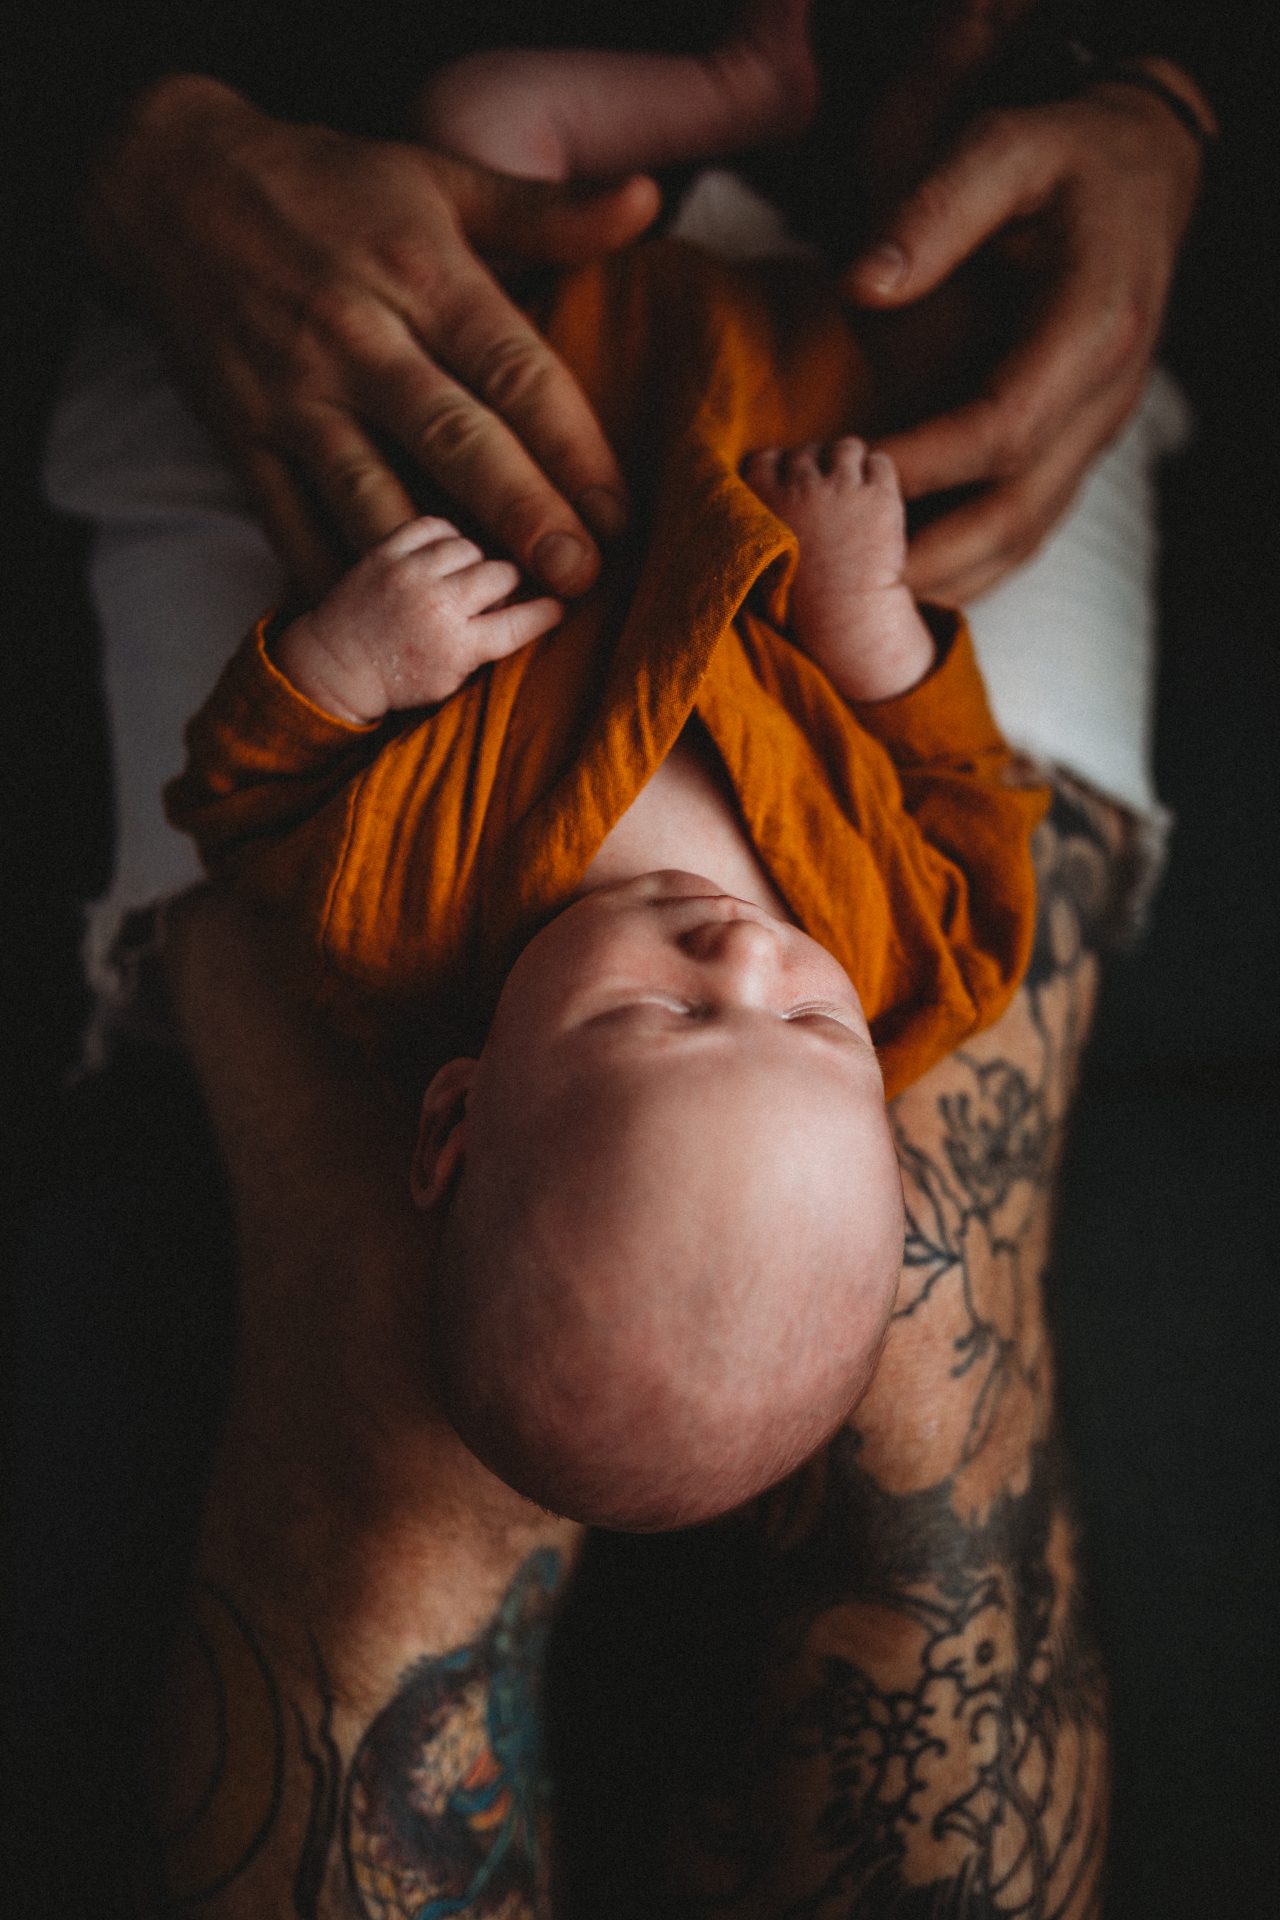 Newborn baby dressed in orange linen suit, laying on his father's tattooed legs